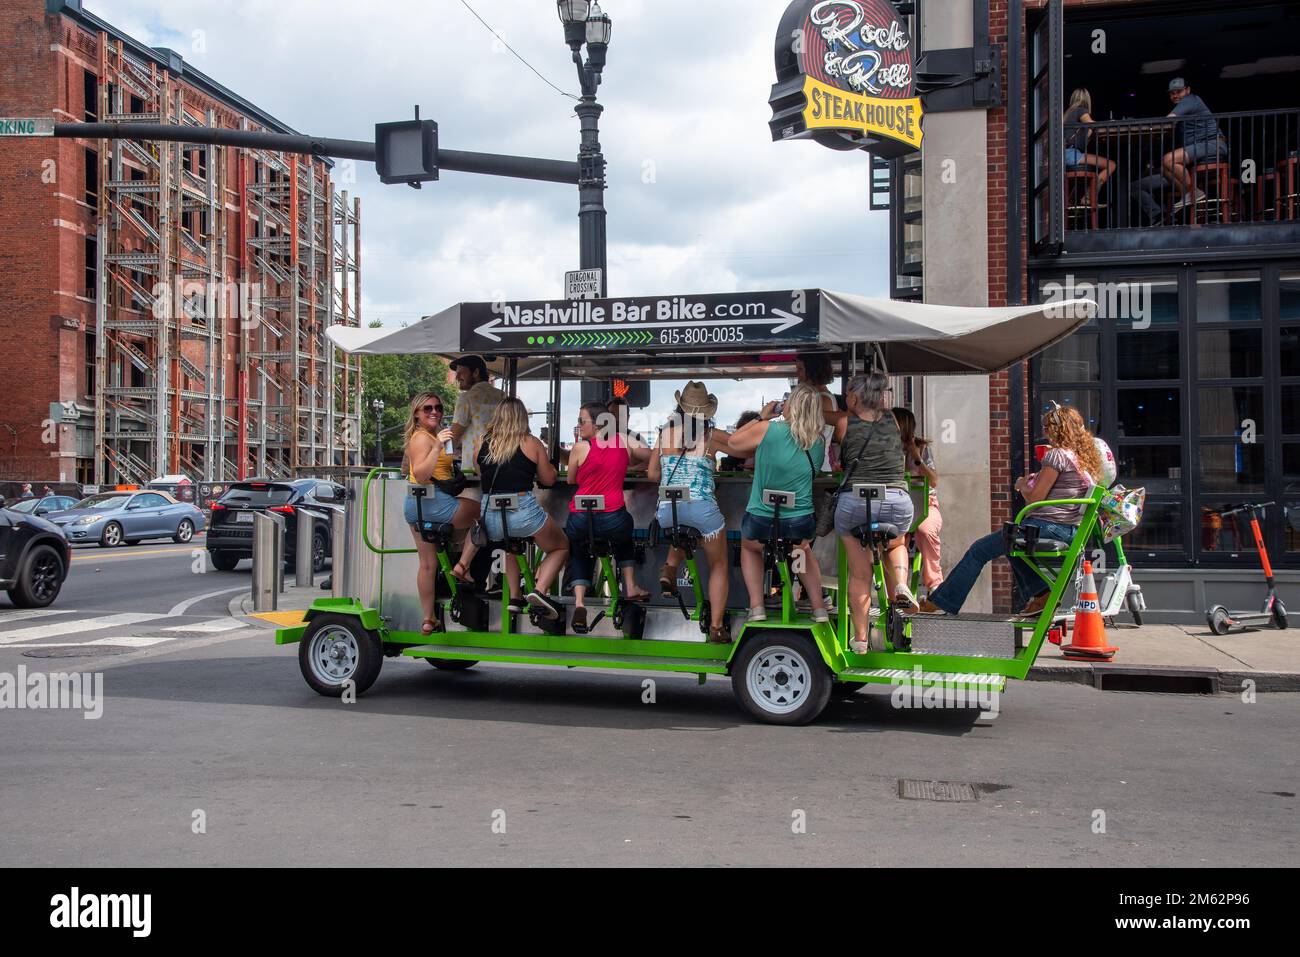 Women in blue jean shorts tour downtown Nashville on a party bar bike, a multi-passenger human-powered vehicle. Stock Photo